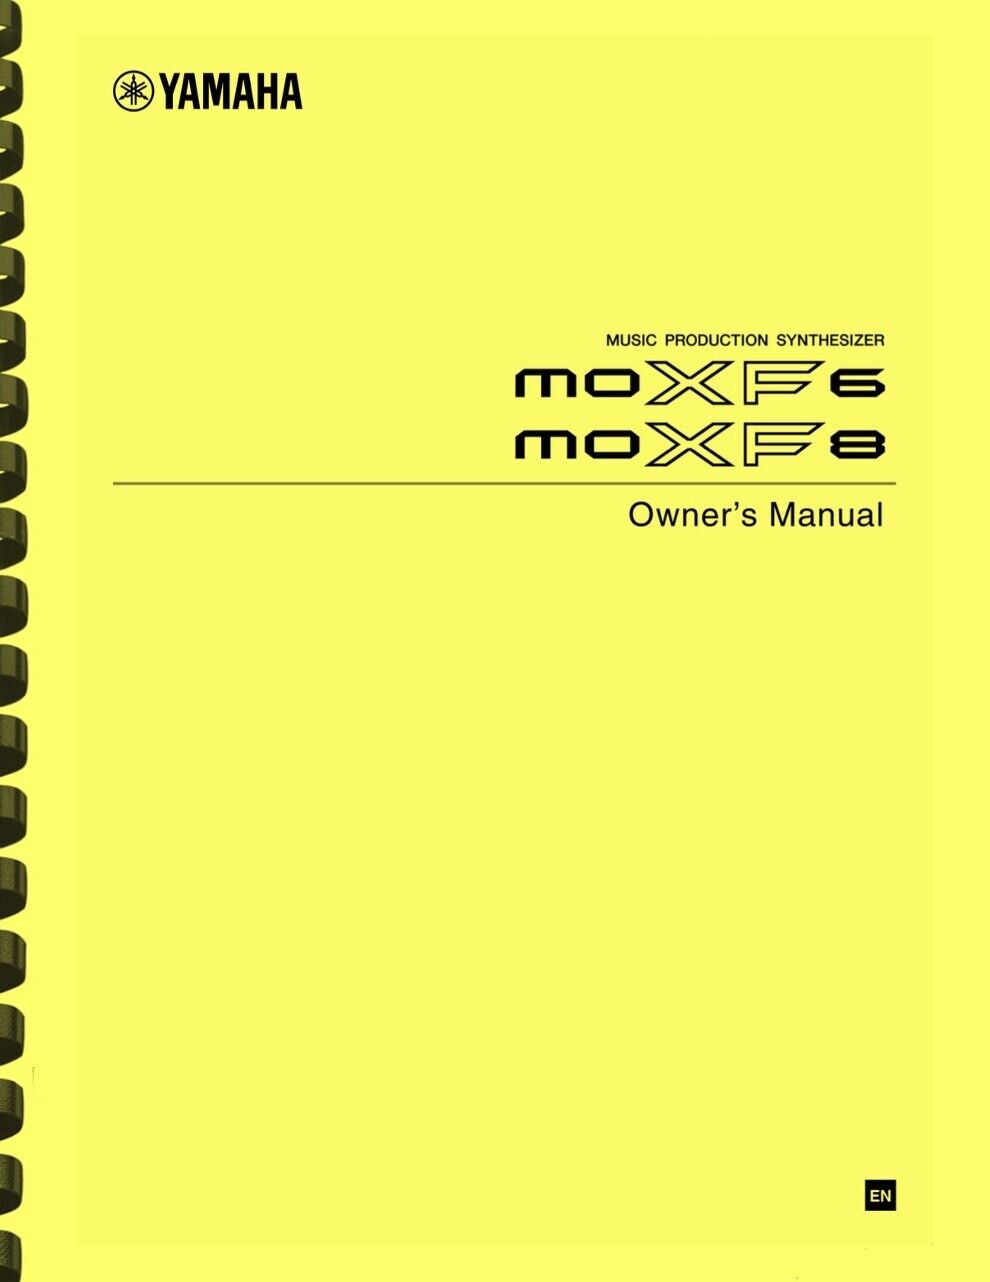 Yamaha MOXF6 MOXF8 Synthesizer Piano OWNER'S MANUAL Без бренда Does Not Apply